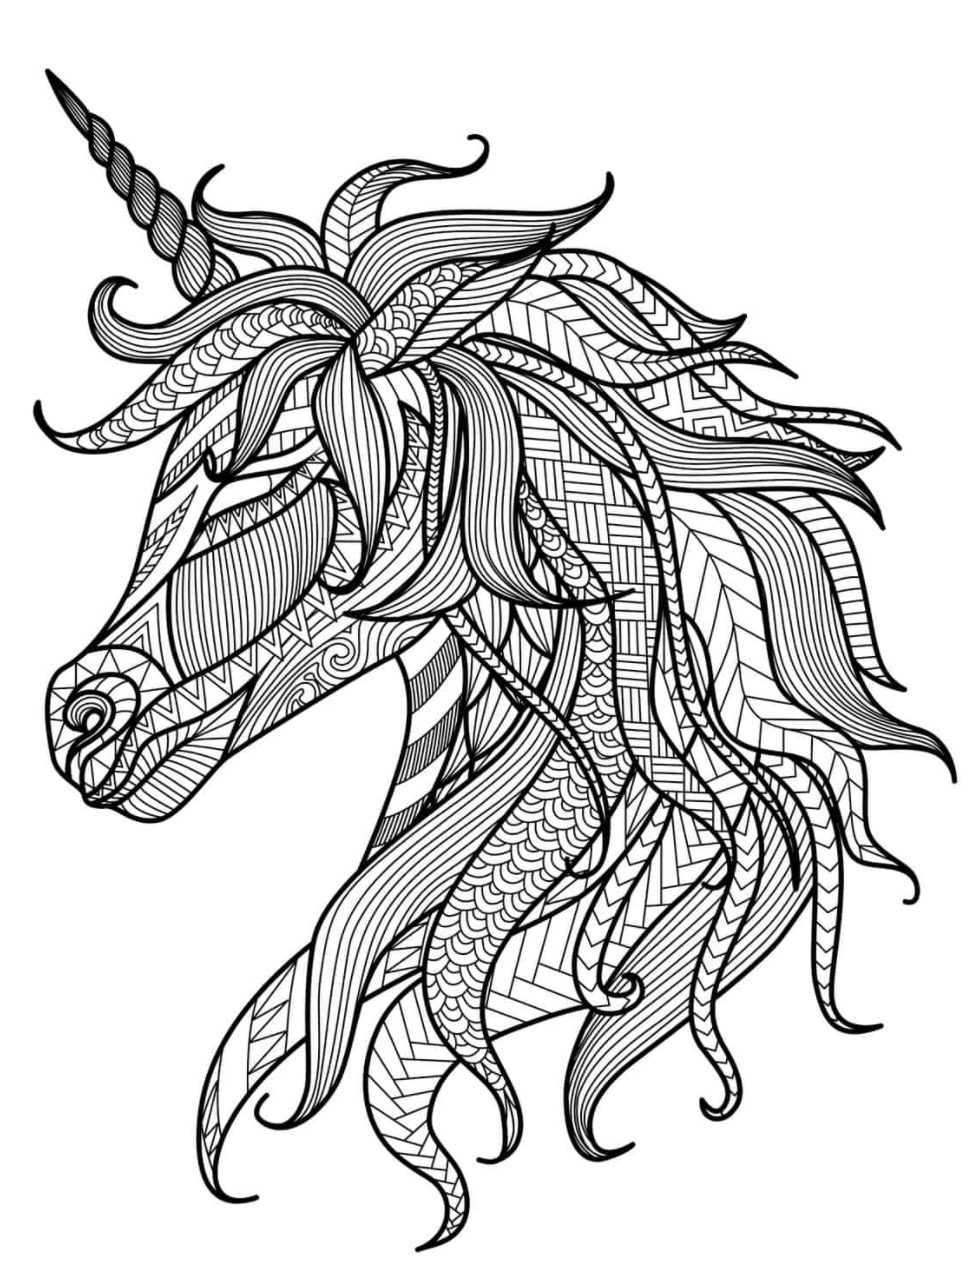 Unicorn adult coloring page